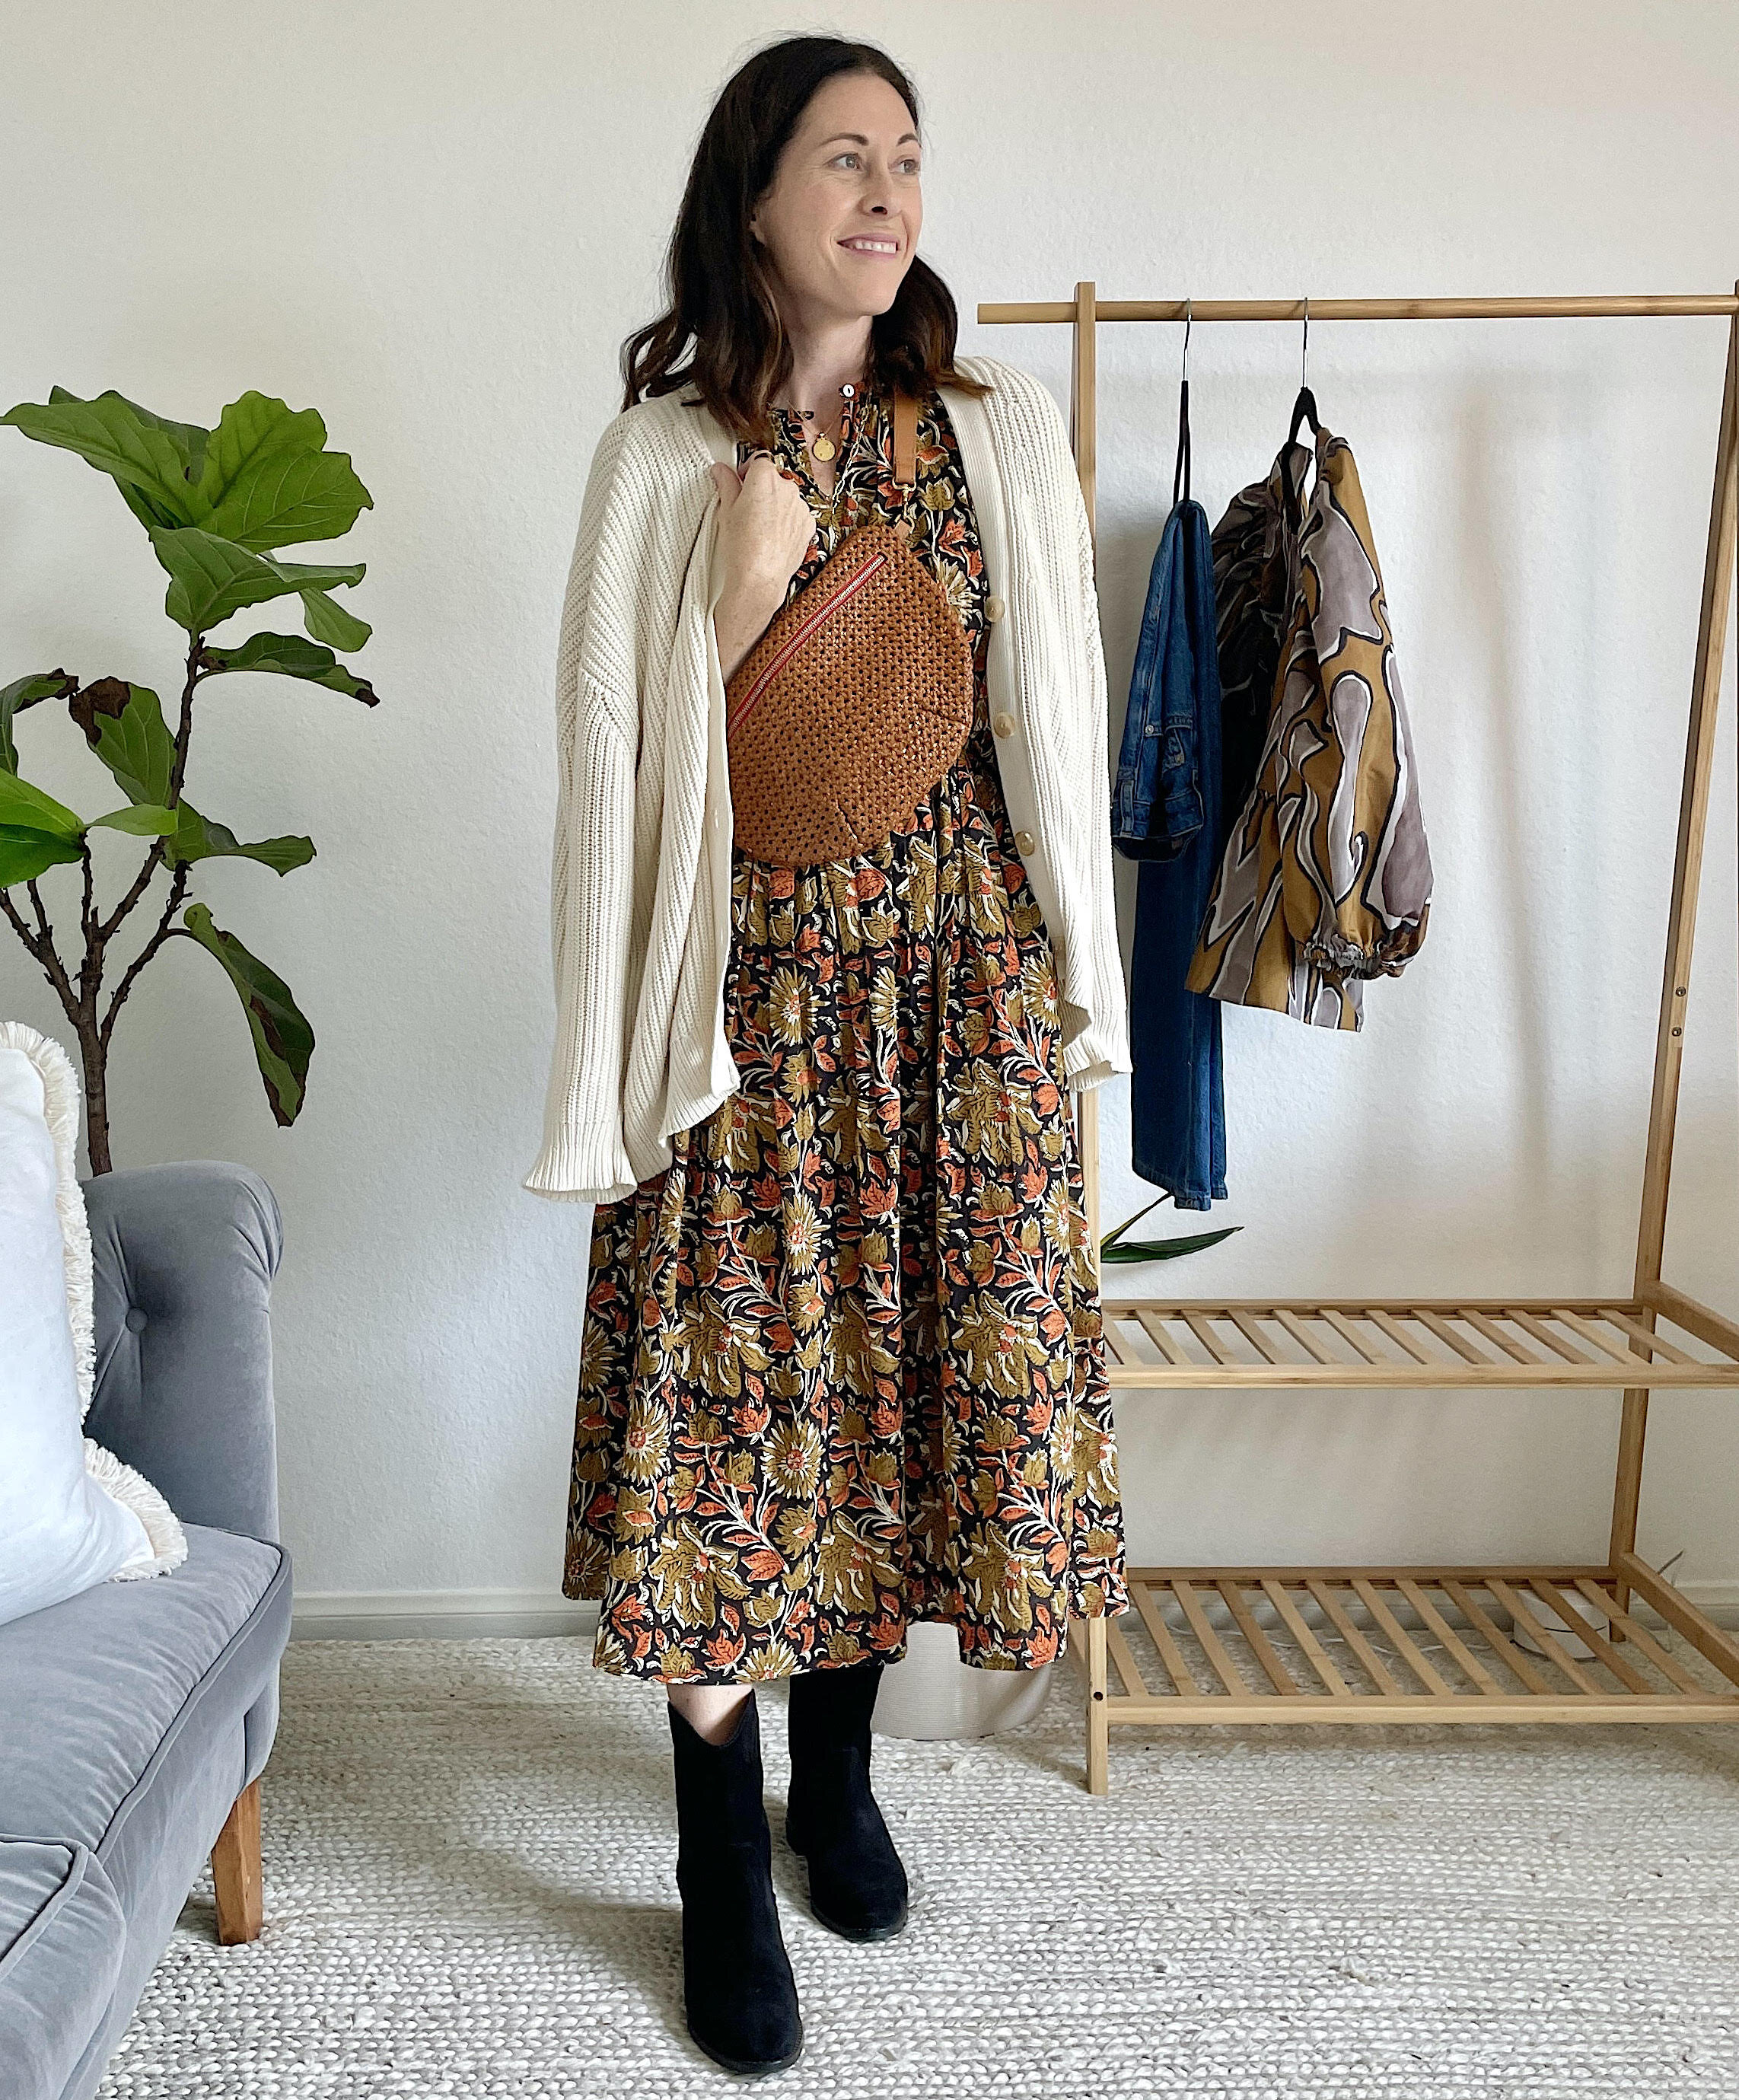 Styling The Freda Salvador Dolly Western Boot — Art In The Find